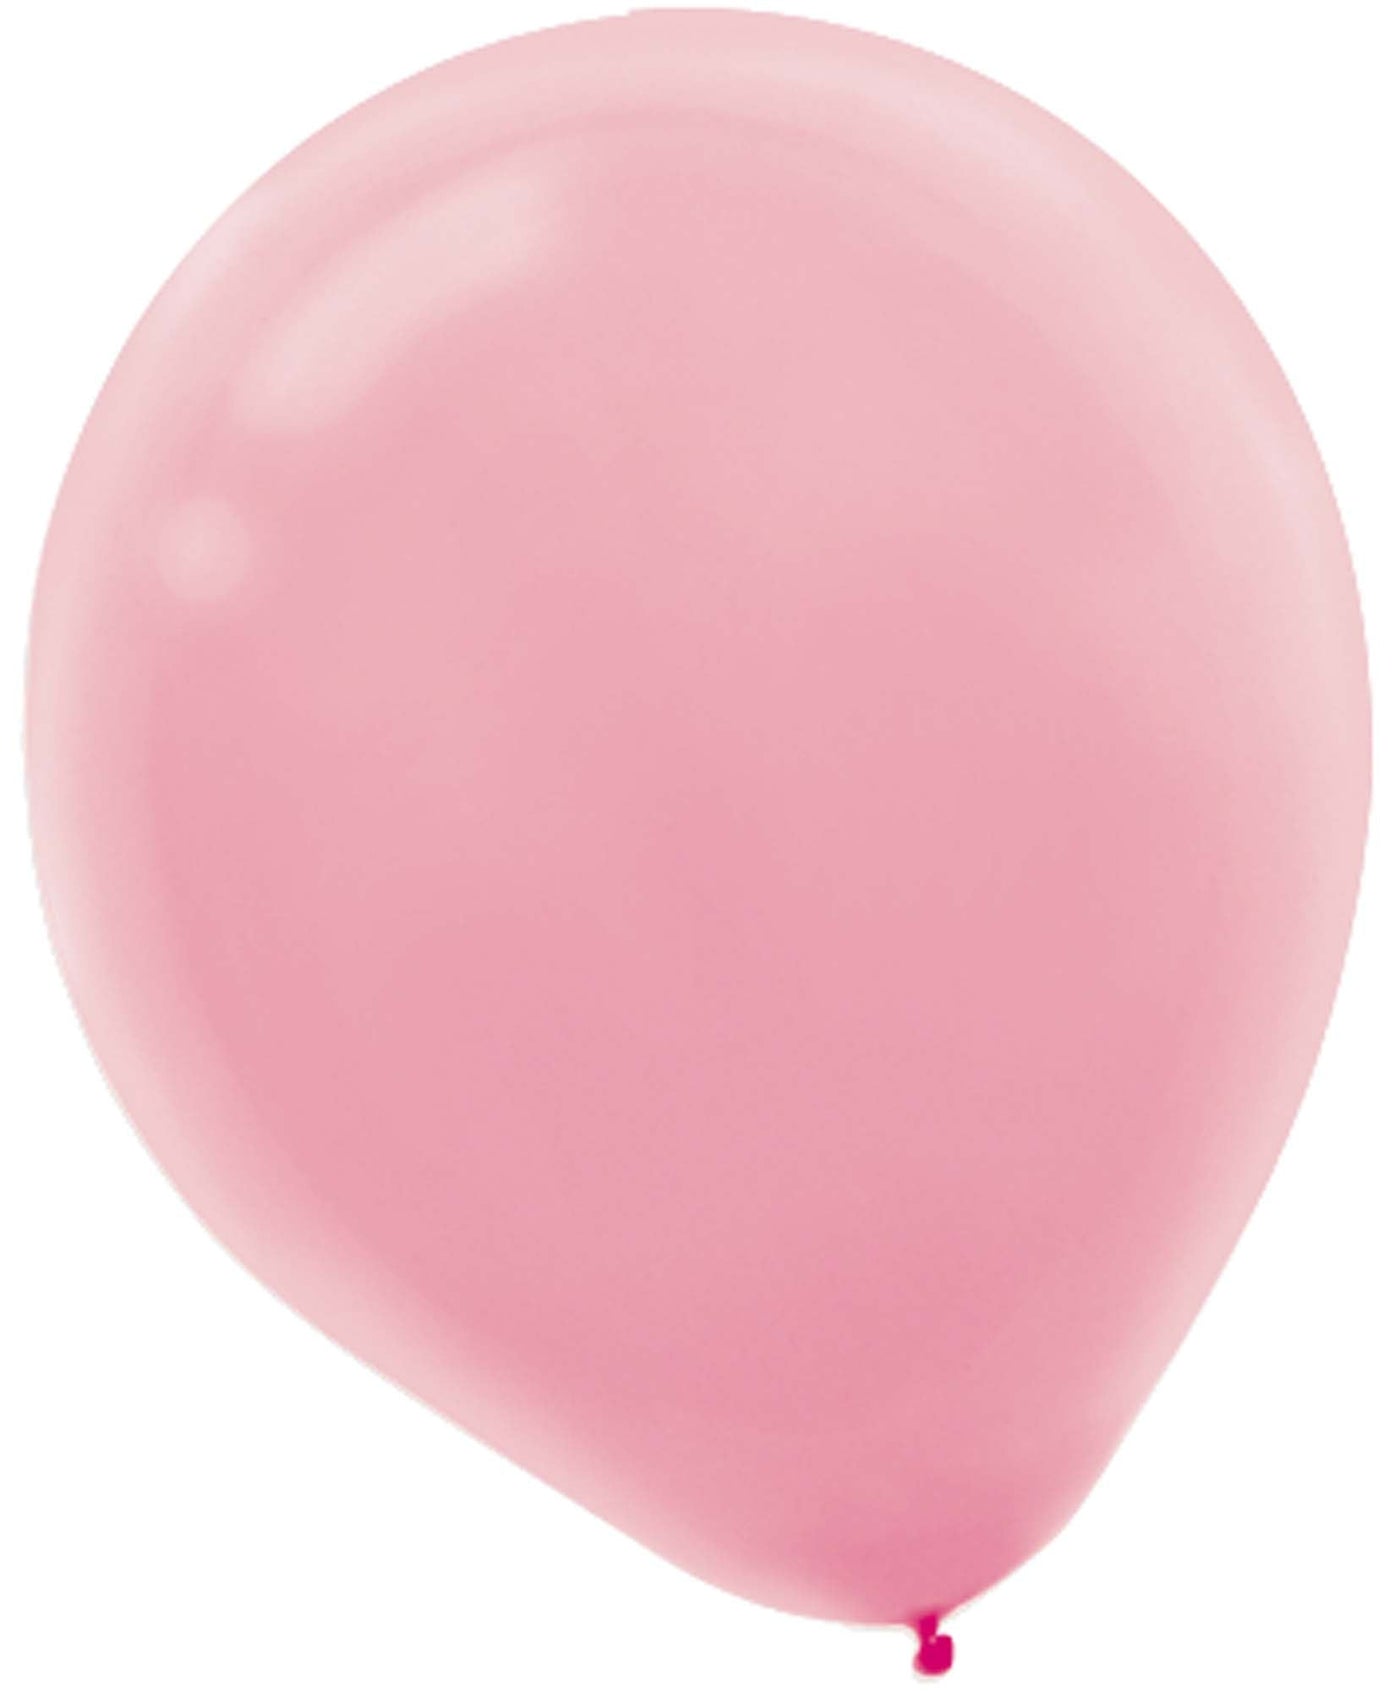 New Pink Latex Balloons 100ct - JJ's Party House